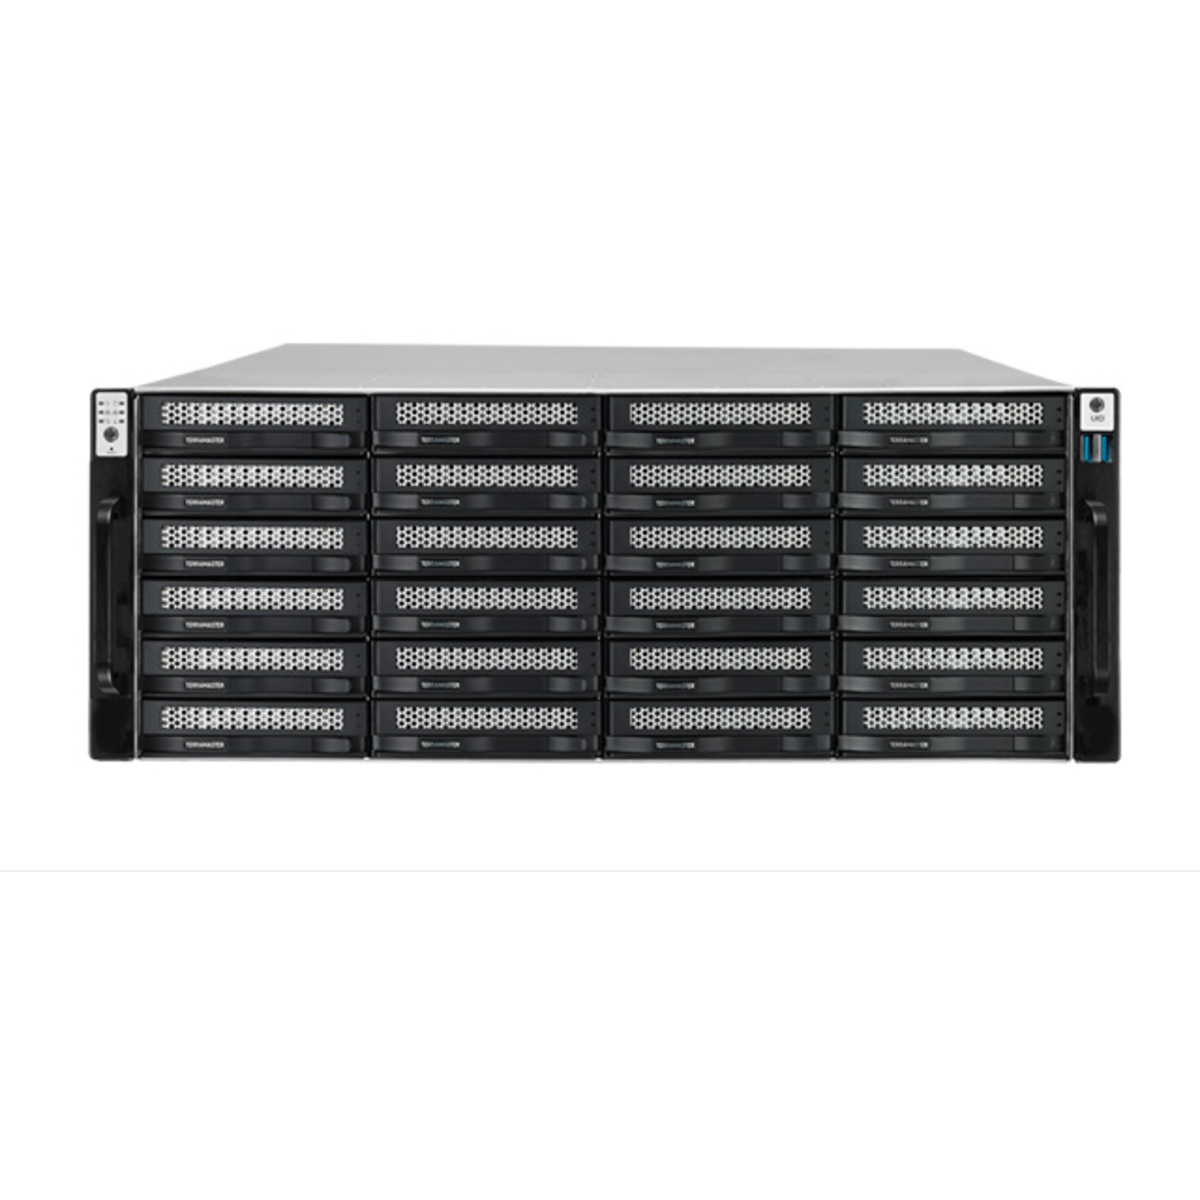 TerraMaster U24-722-2224 360tb 24-Bay RackMount Large Business / Enterprise NAS - Network Attached Storage Device 20x18tb Seagate EXOS X18 ST18000NM000J 3.5 7200rpm SATA 6Gb/s HDD ENTERPRISE Class Drives Installed - Burn-In Tested U24-722-2224